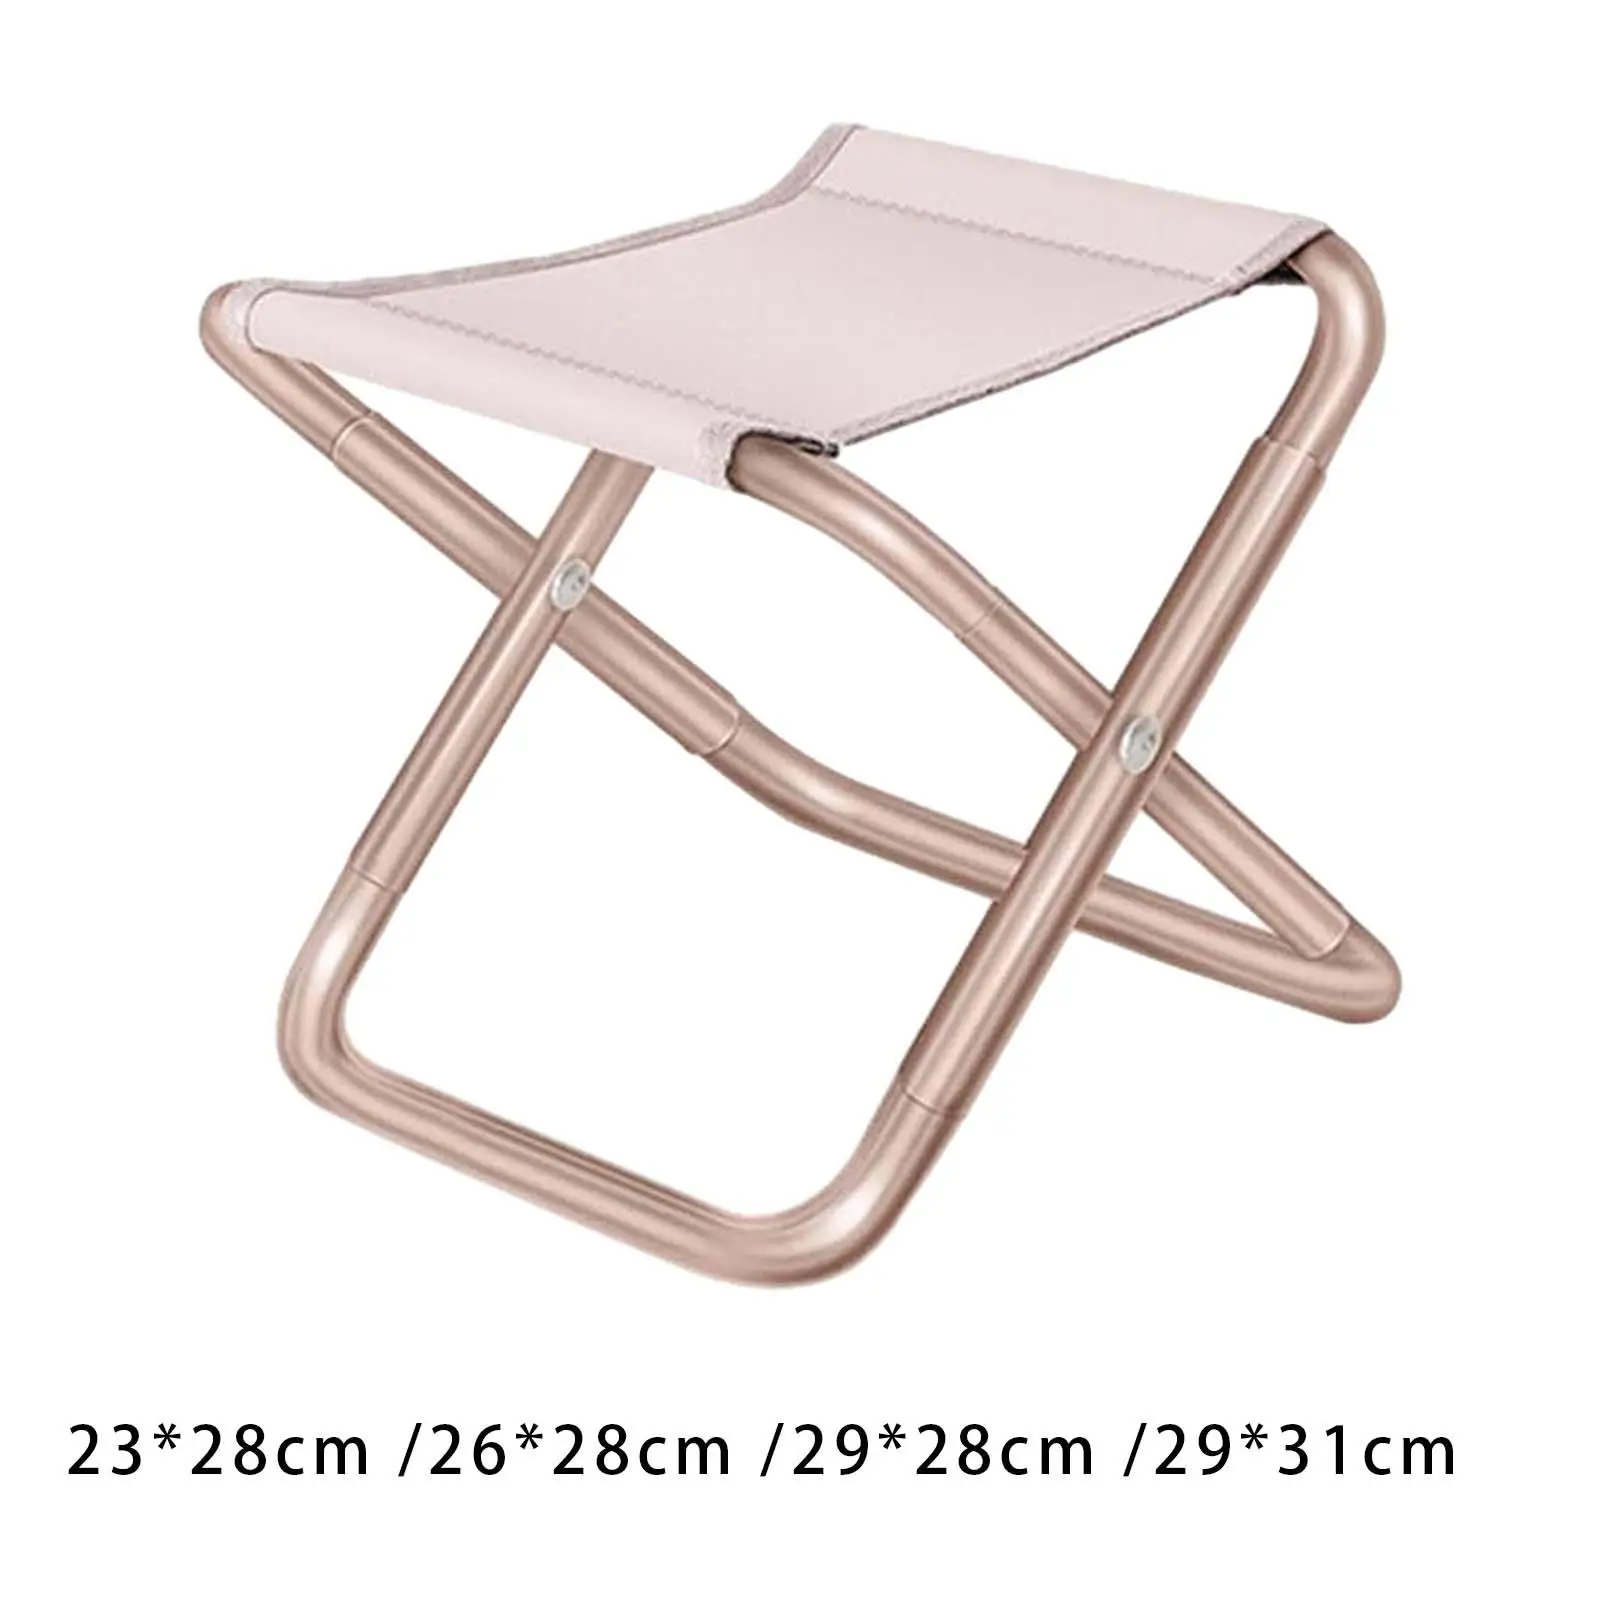 Lightweight Camping Chair Portable Ultralight Collapsible Foot Stool Mini Size Folding Fishing Chair for Travel Backyard Hiking